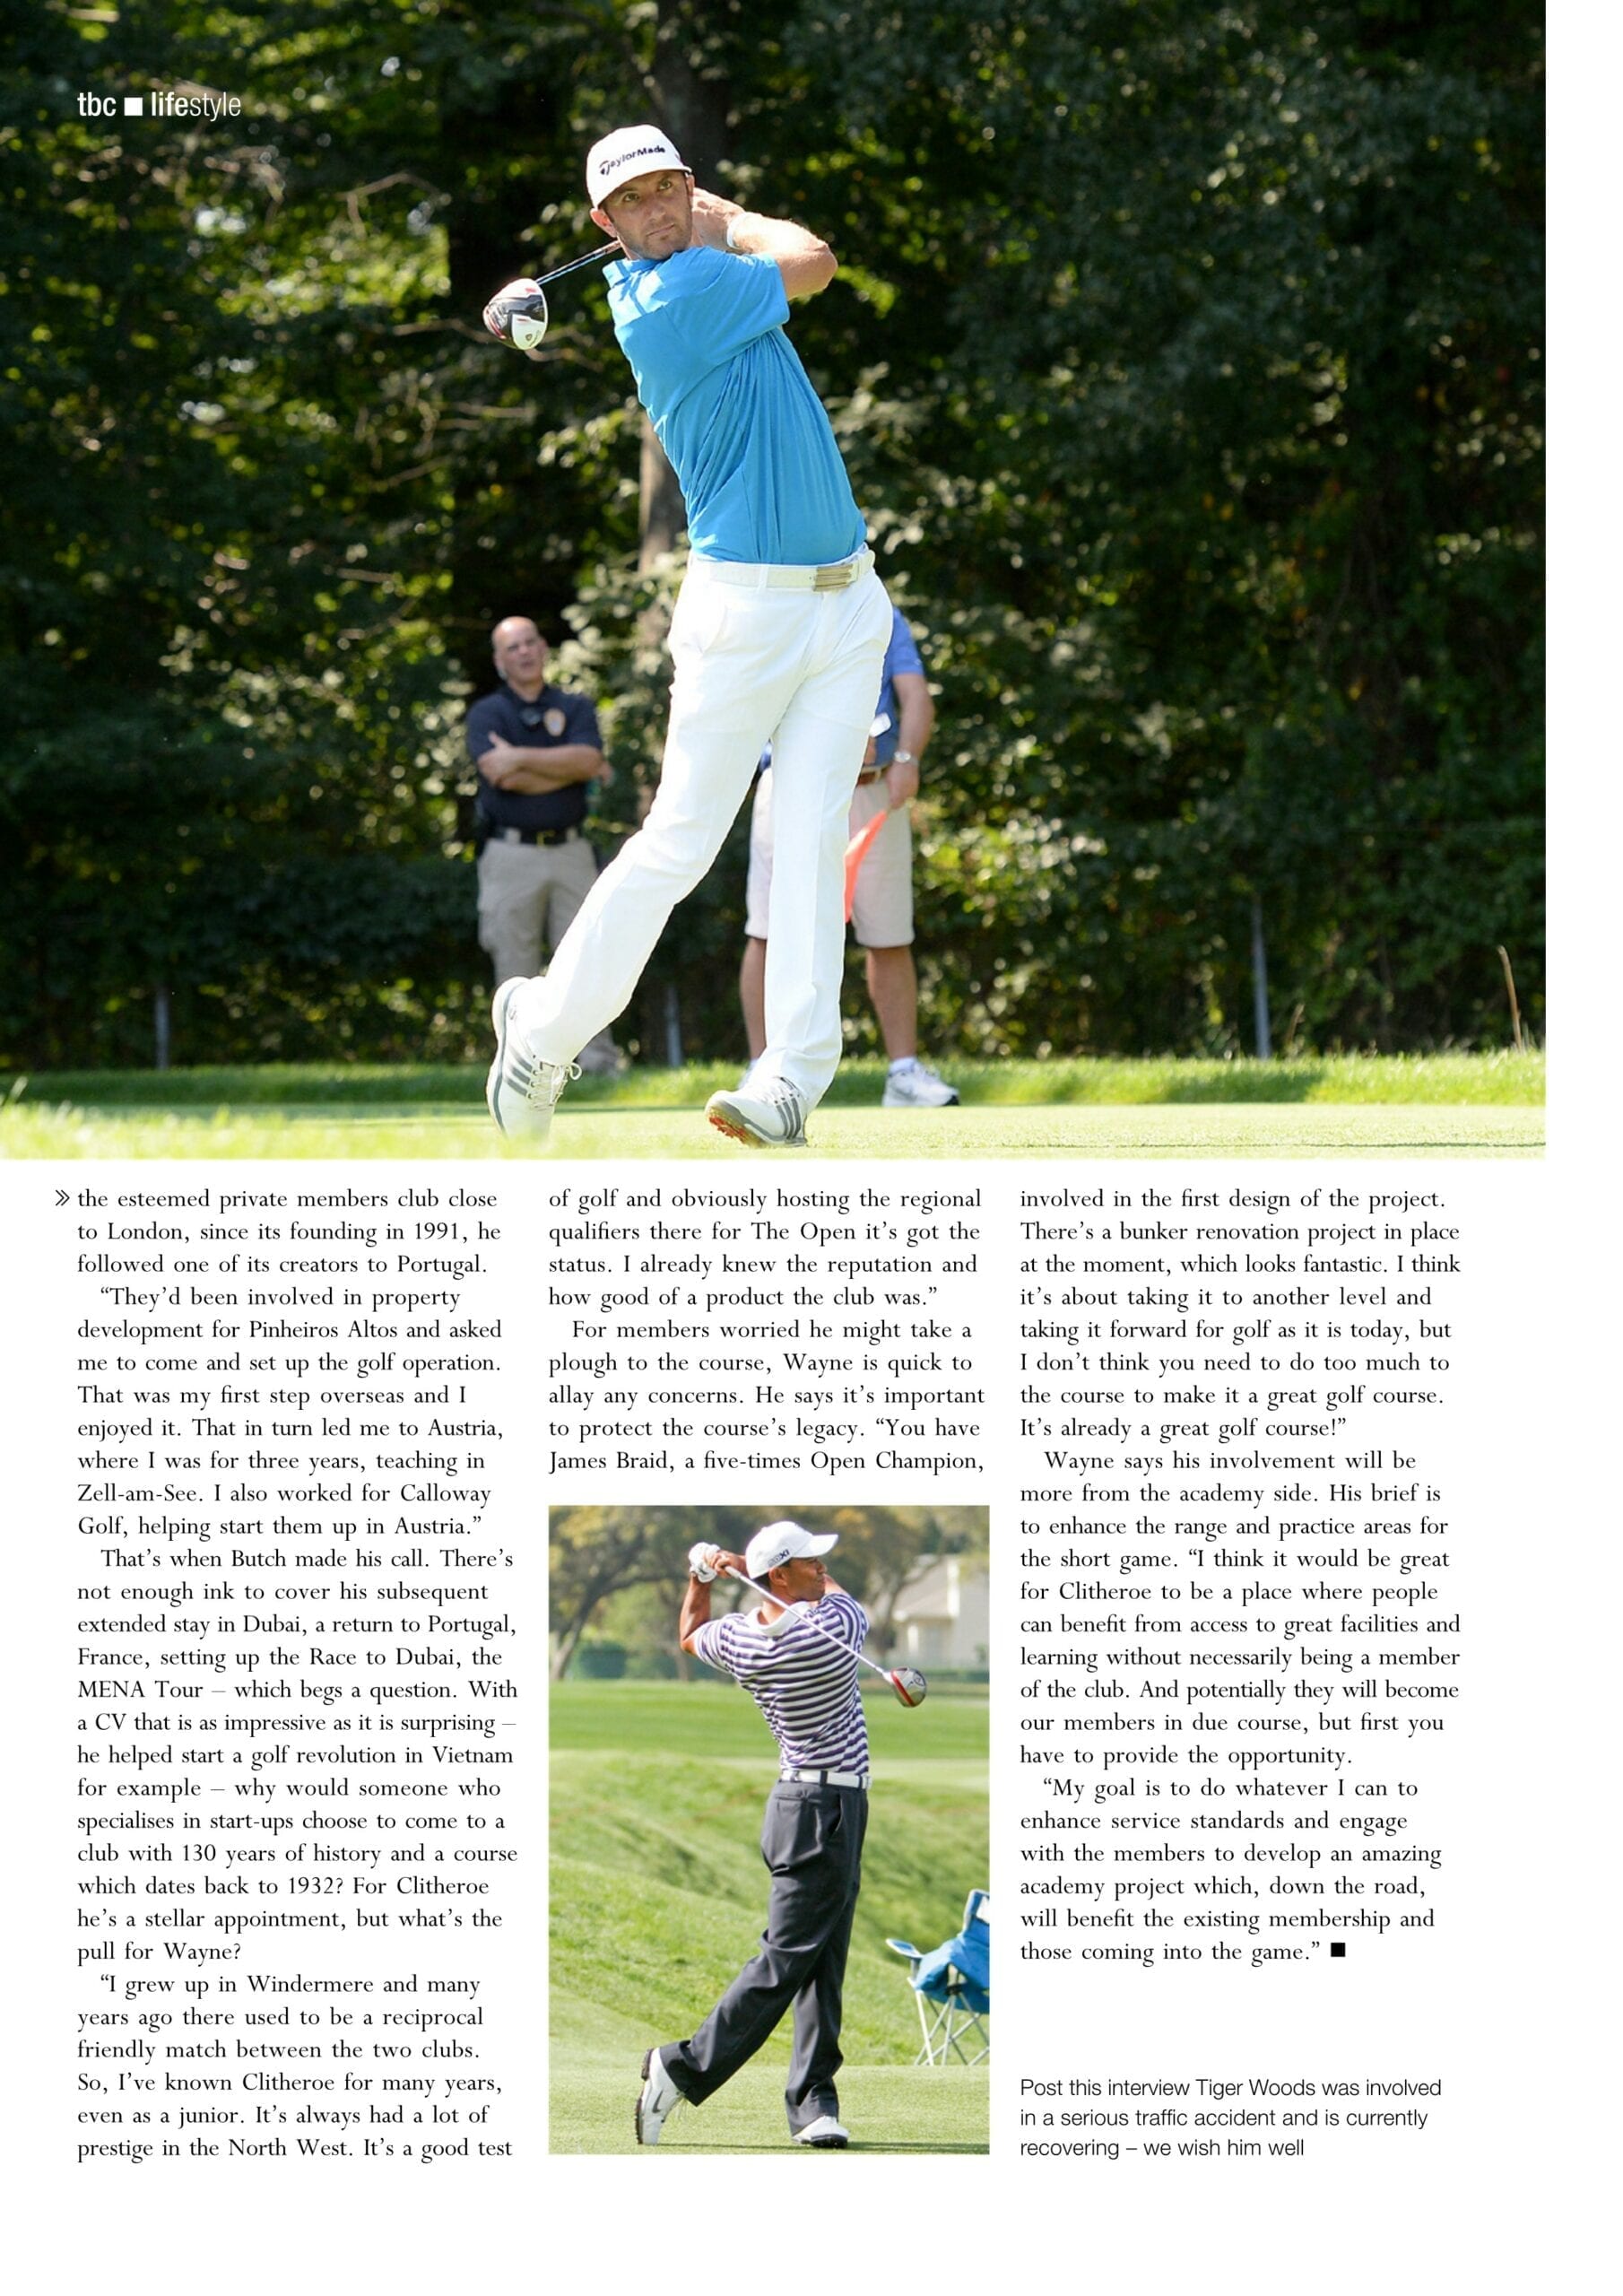 ribble valley magazine scanned article